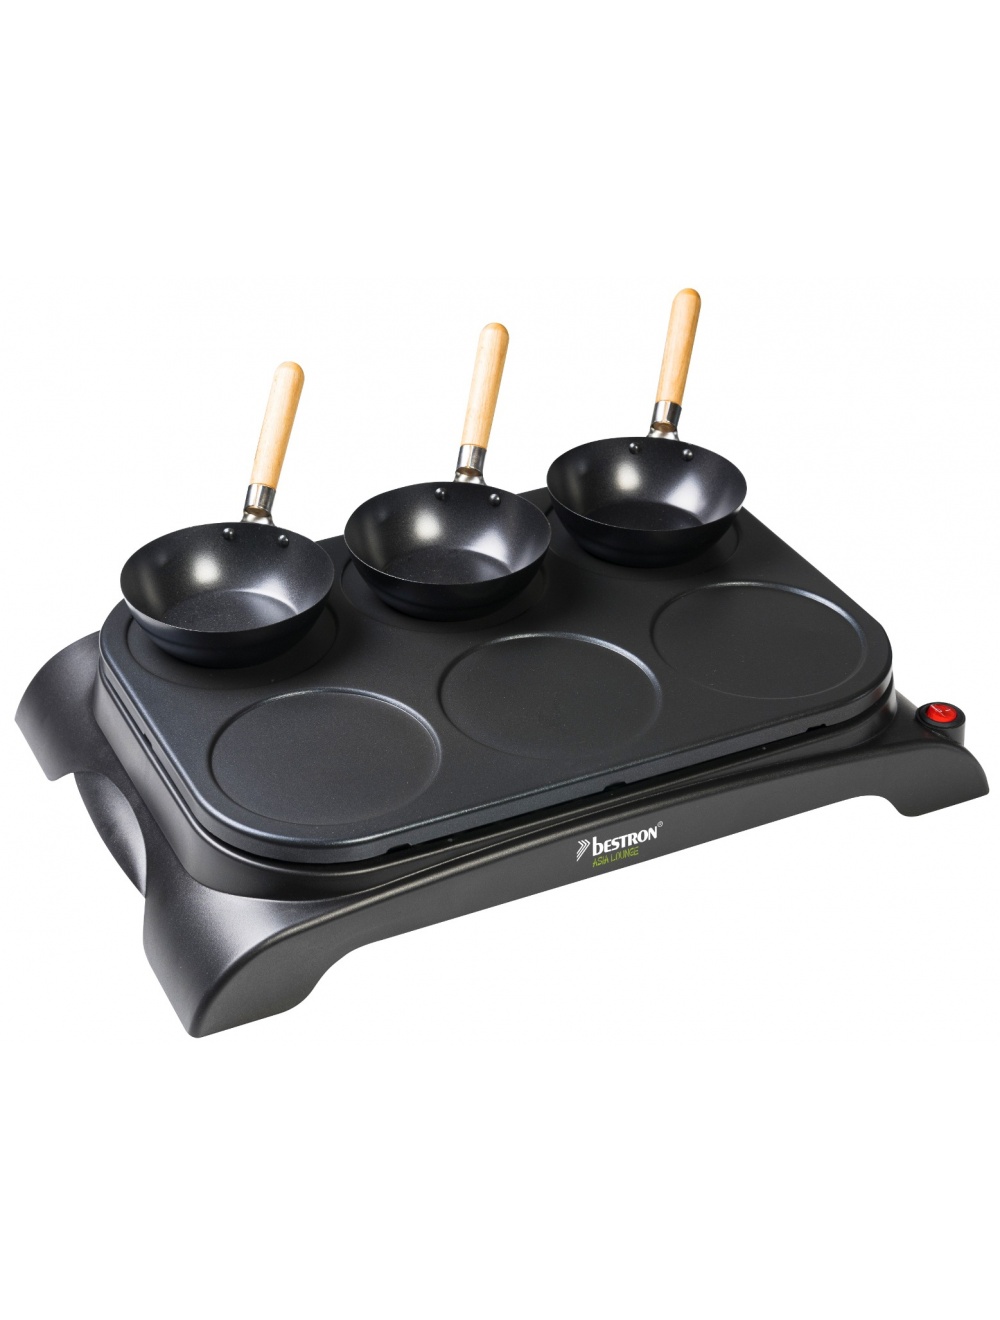 Bestron Party Wok & Crepemaker Set - 6 persons